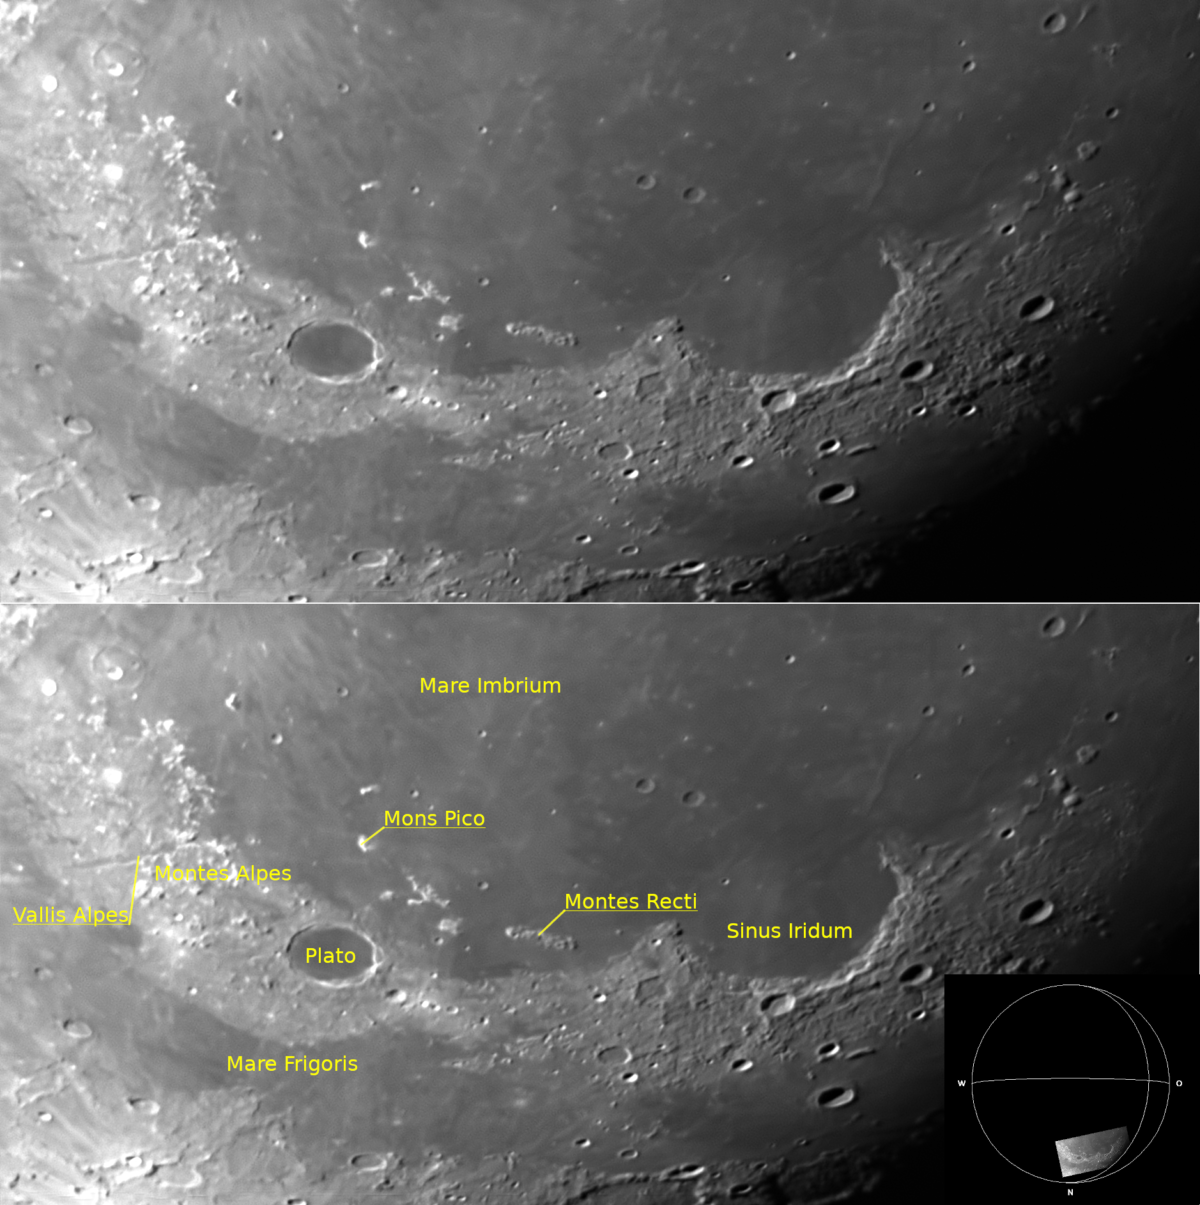 The Moon: Plato and Copernucus craters